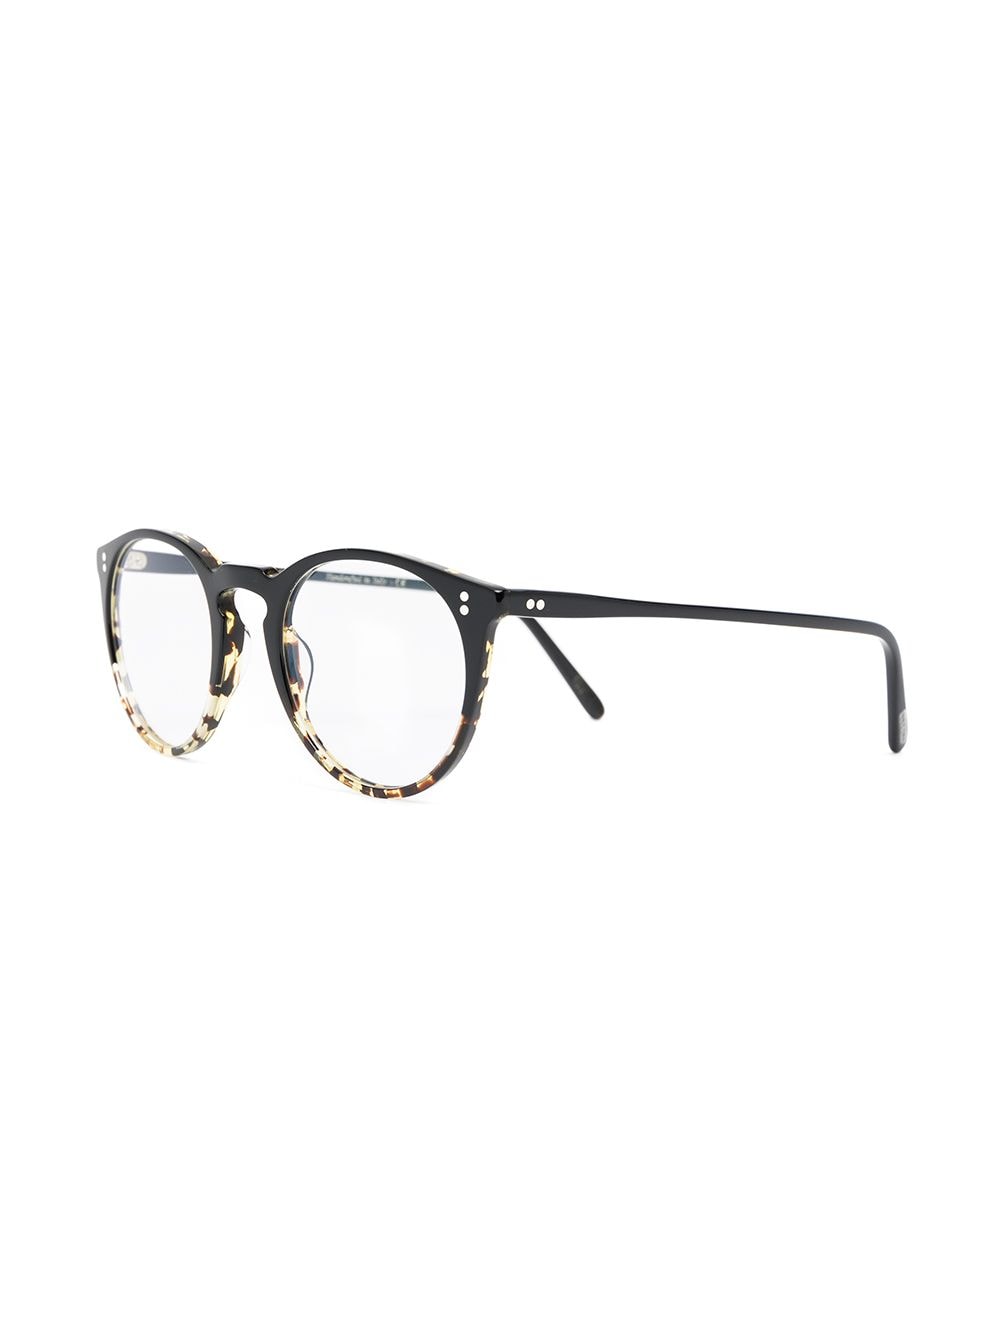 Image 2 of Oliver Peoples O' Malley round frame glasses